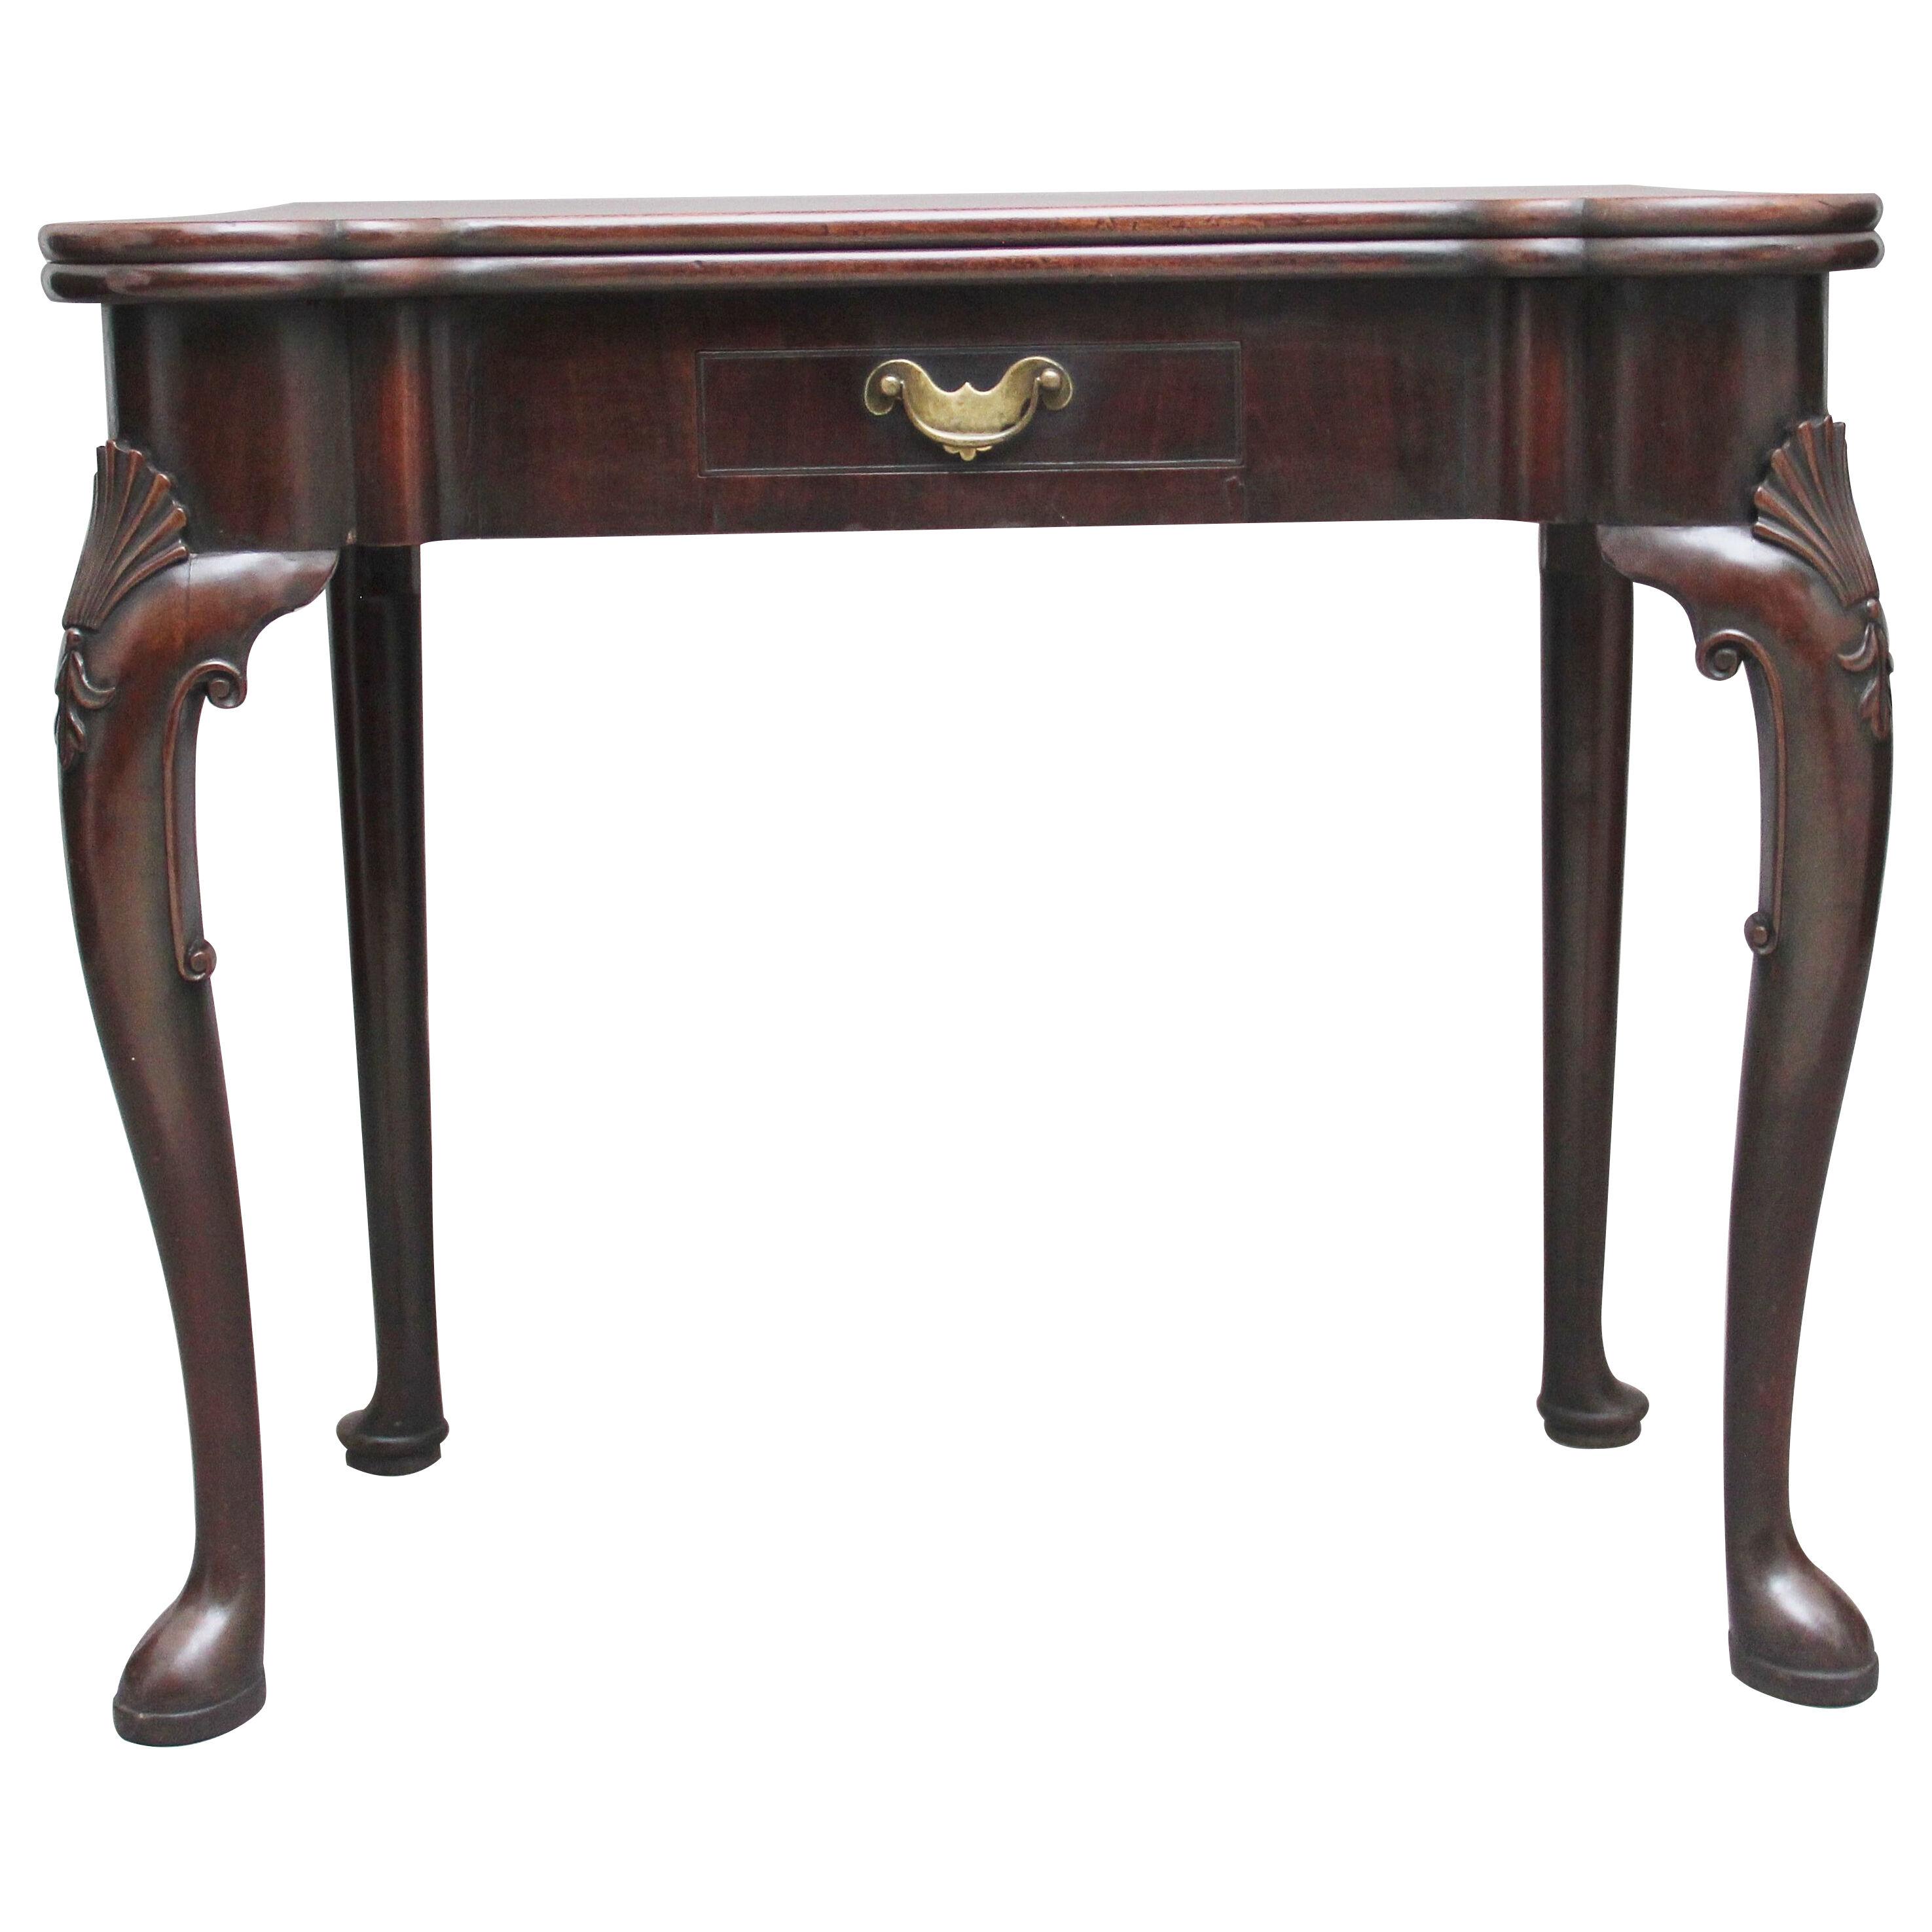 Superb quality early 18th Century mahogany games table